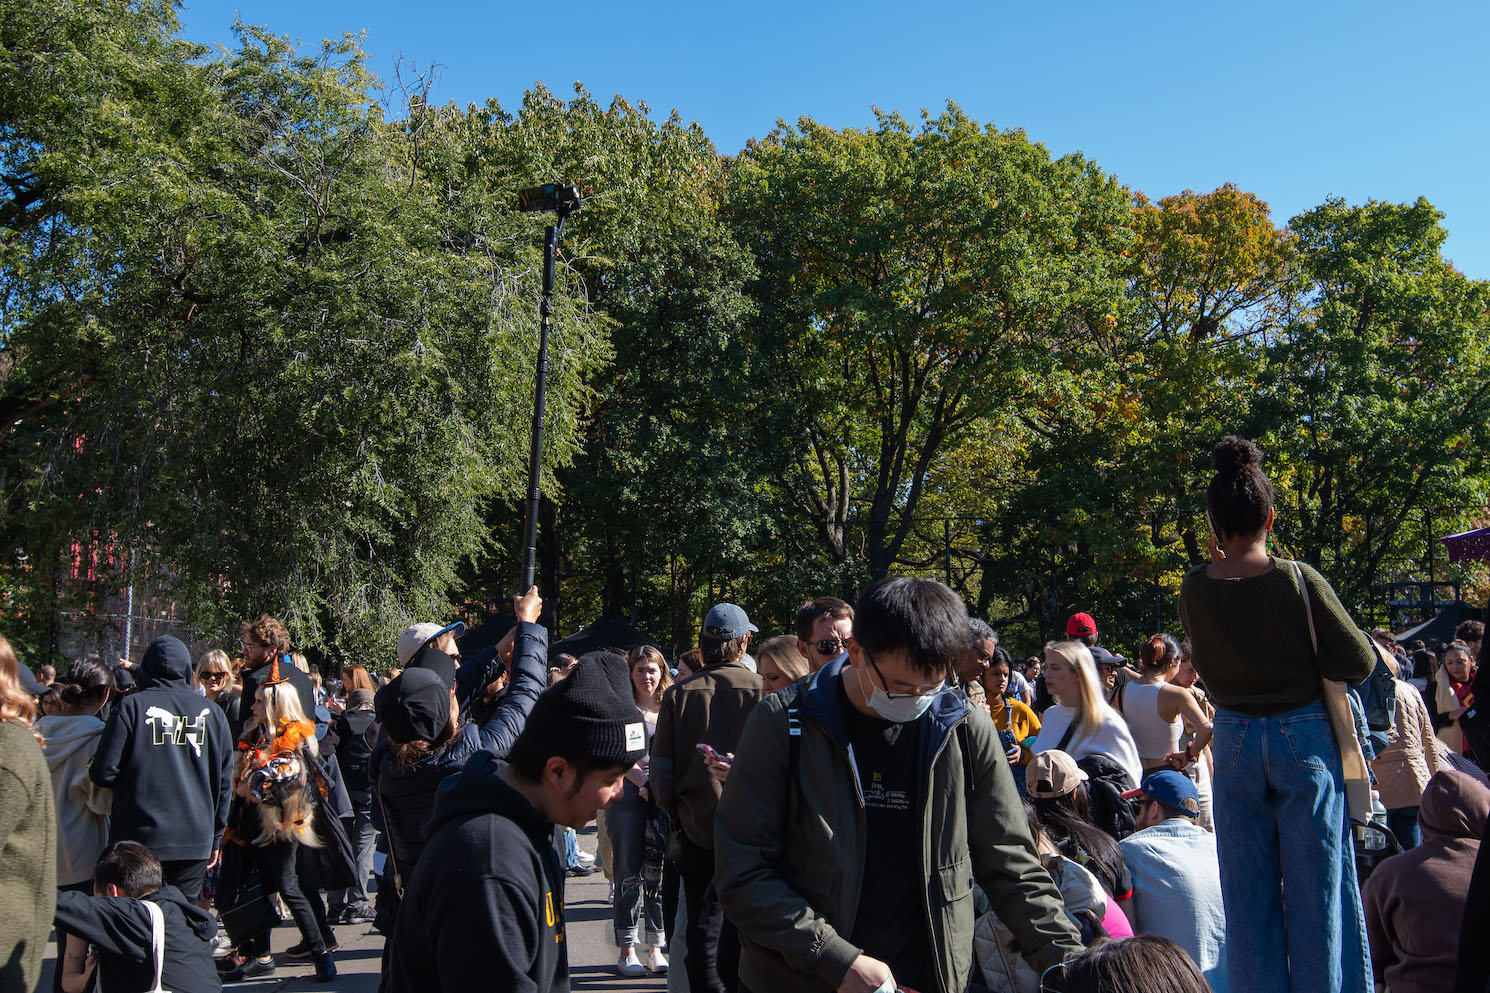 A crowd of people gather in the skate park of Tompkins Square Park. A person on the left holds a six-foot-long selfie stick with a phone attached.